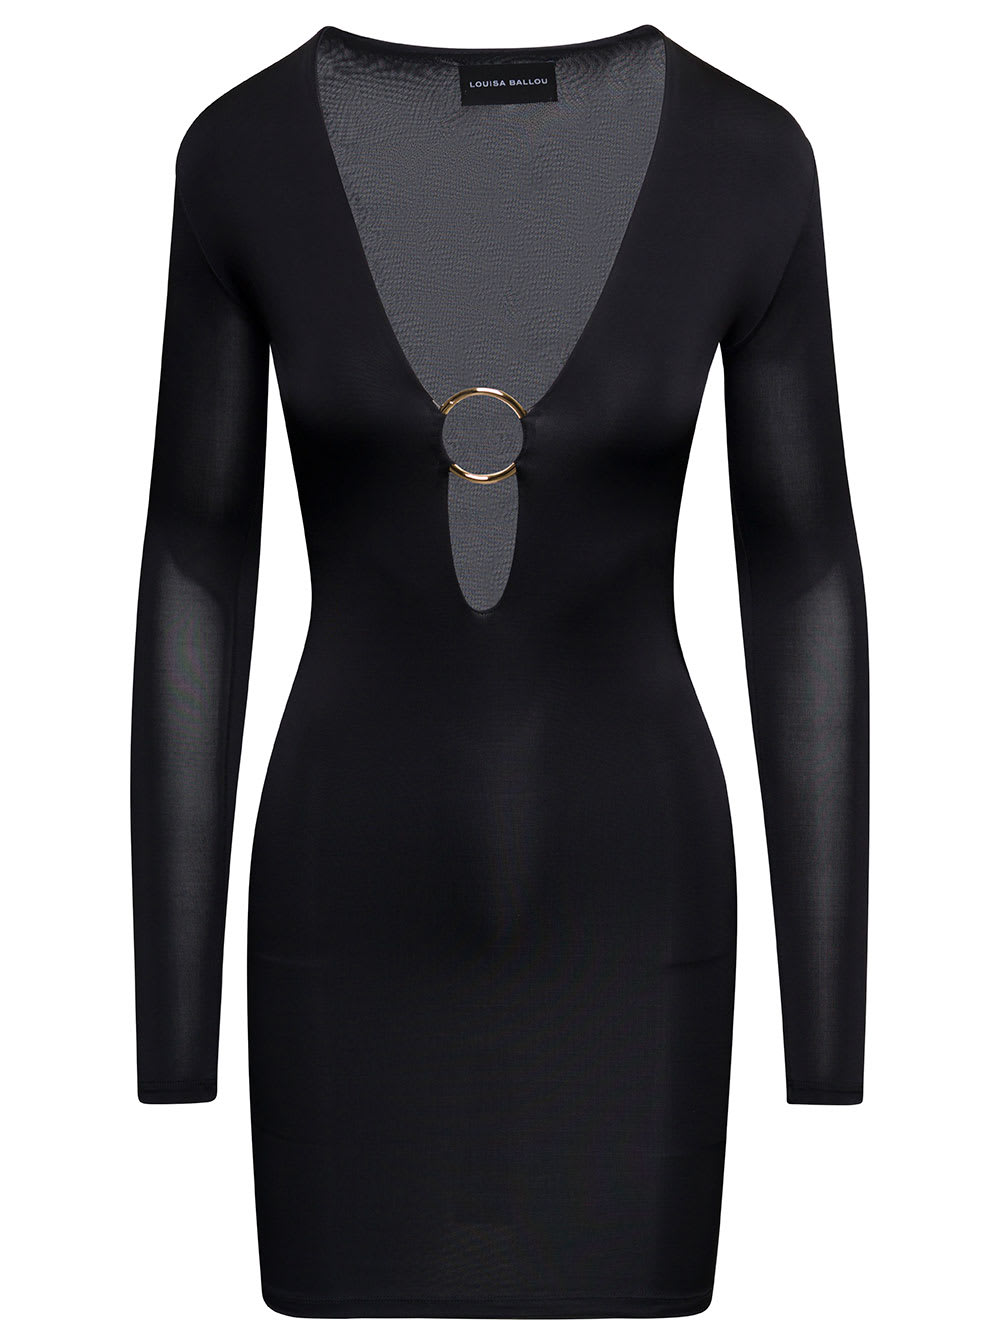 LOUISA BALLOU BLACK HELIOS PLUNGE MINIDRESS WITH V NECK AND GOLDEN RING LONG SLEEVES IN VISCOSE WOMAN